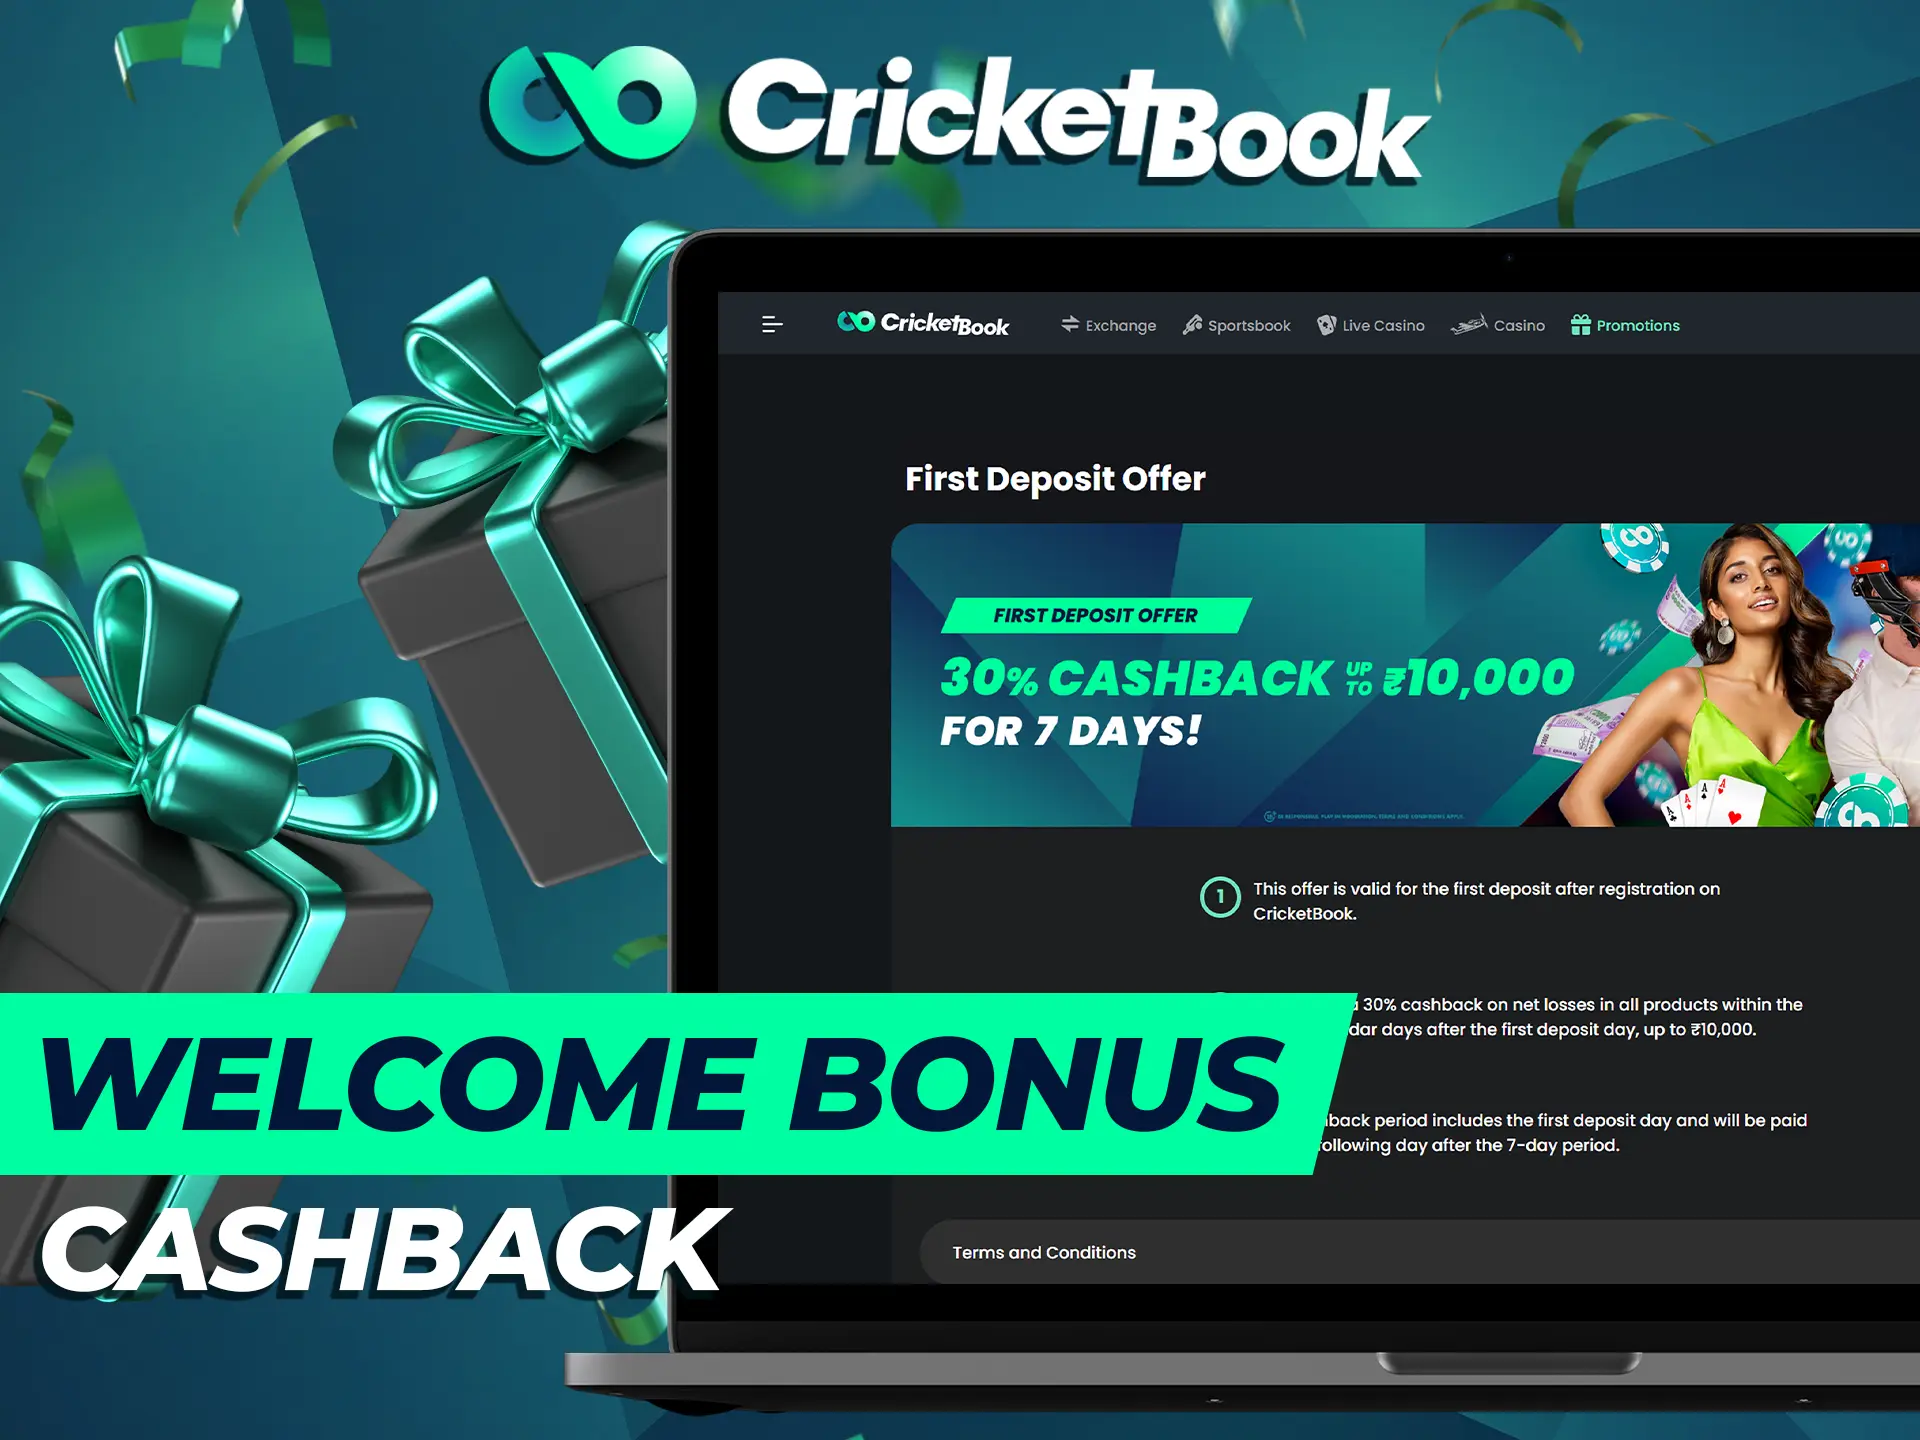 The Cashback welcome bonus can be claimed as soon as you sign up with CricketBook.